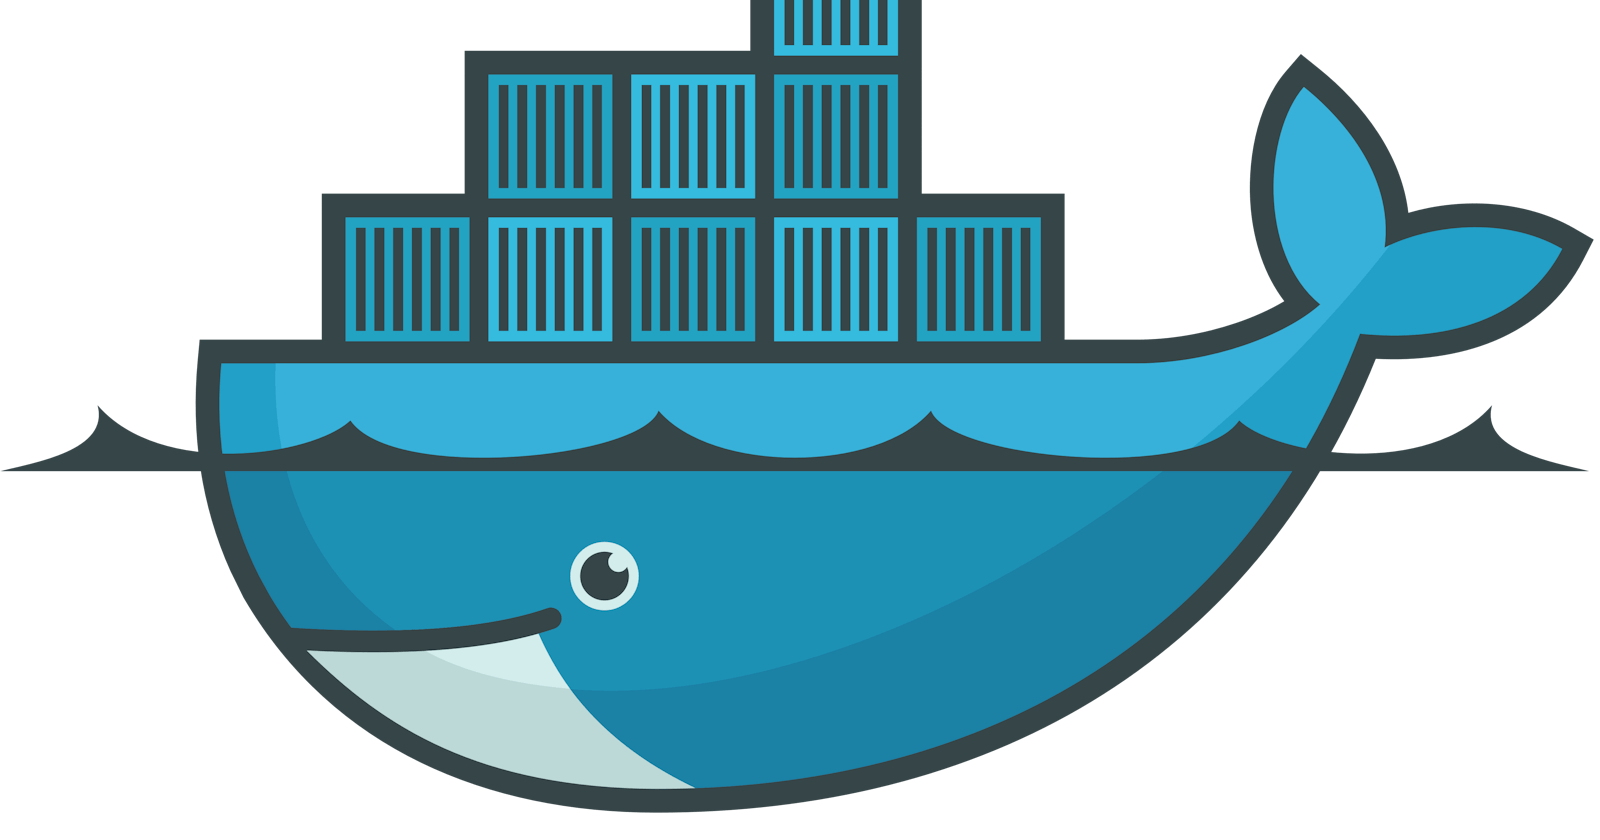 What exactly is Docker?